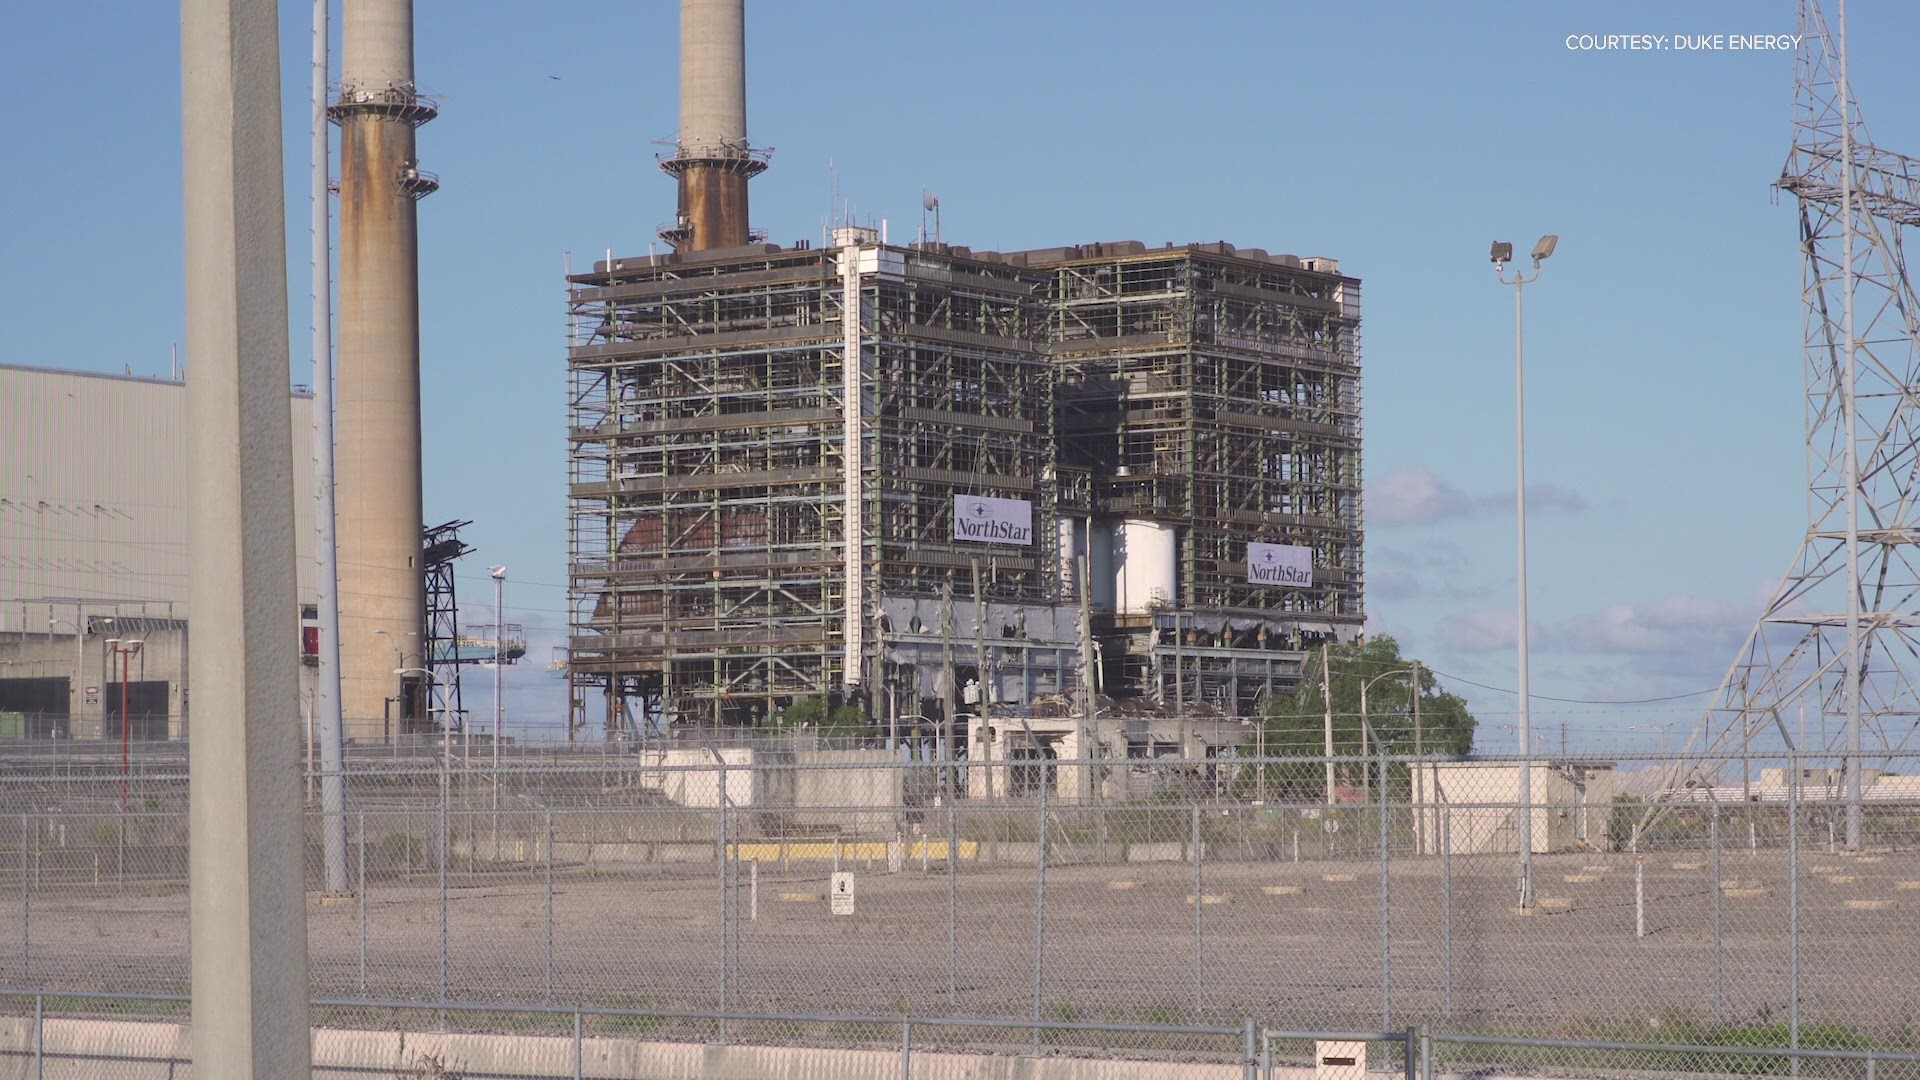 The company recently opened its Citrus Combined Cycle Station, a natural gas plant.